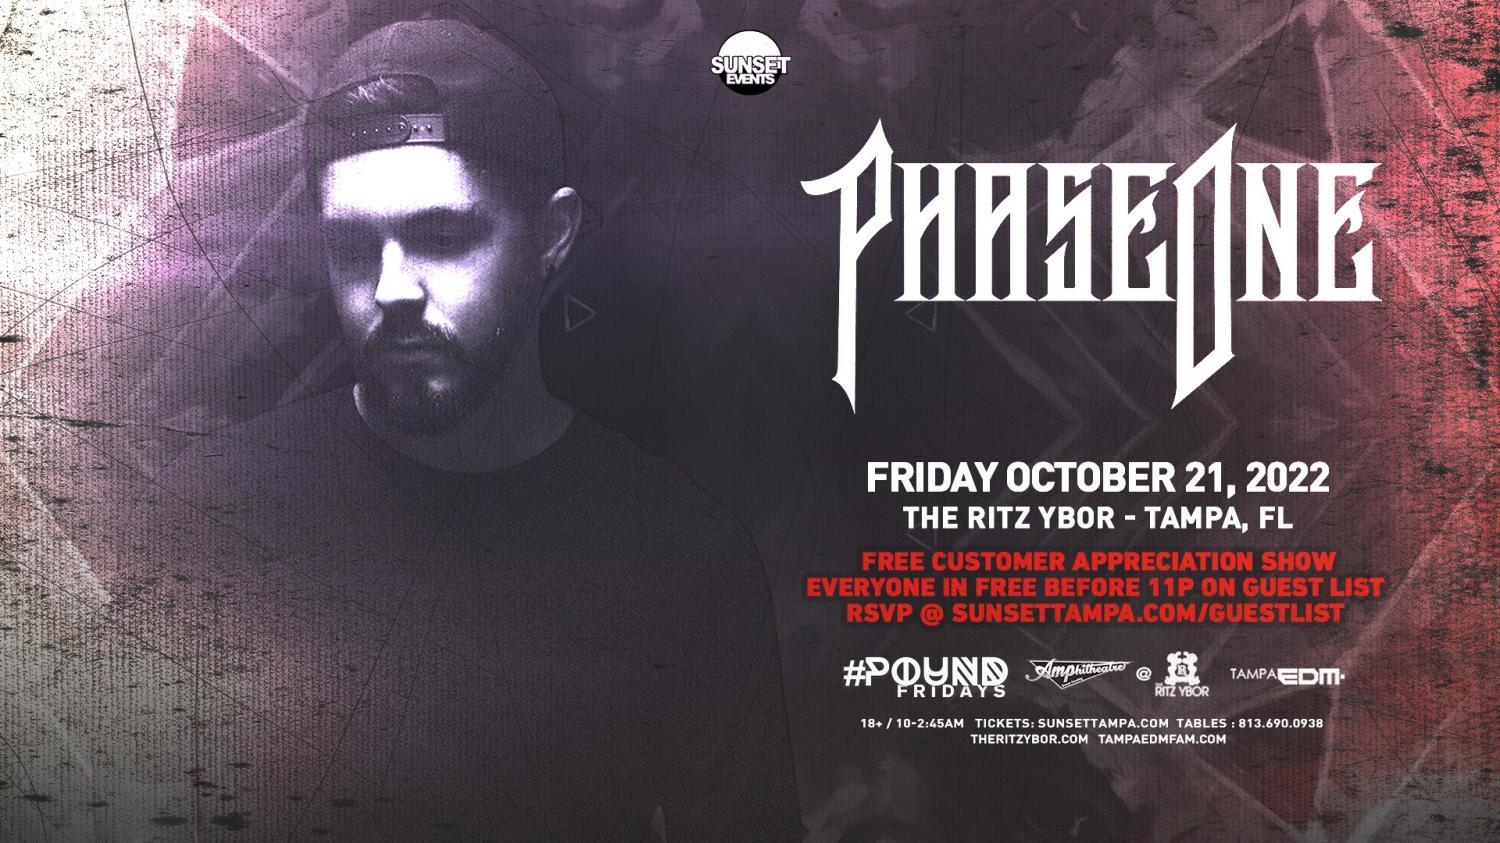 PhaseOne for #Pound Fridays - Tampa, FL - Free Guest List
Fri Oct 21, 7:00 PM - Sat Oct 22, 12:00 AM
in 3 days